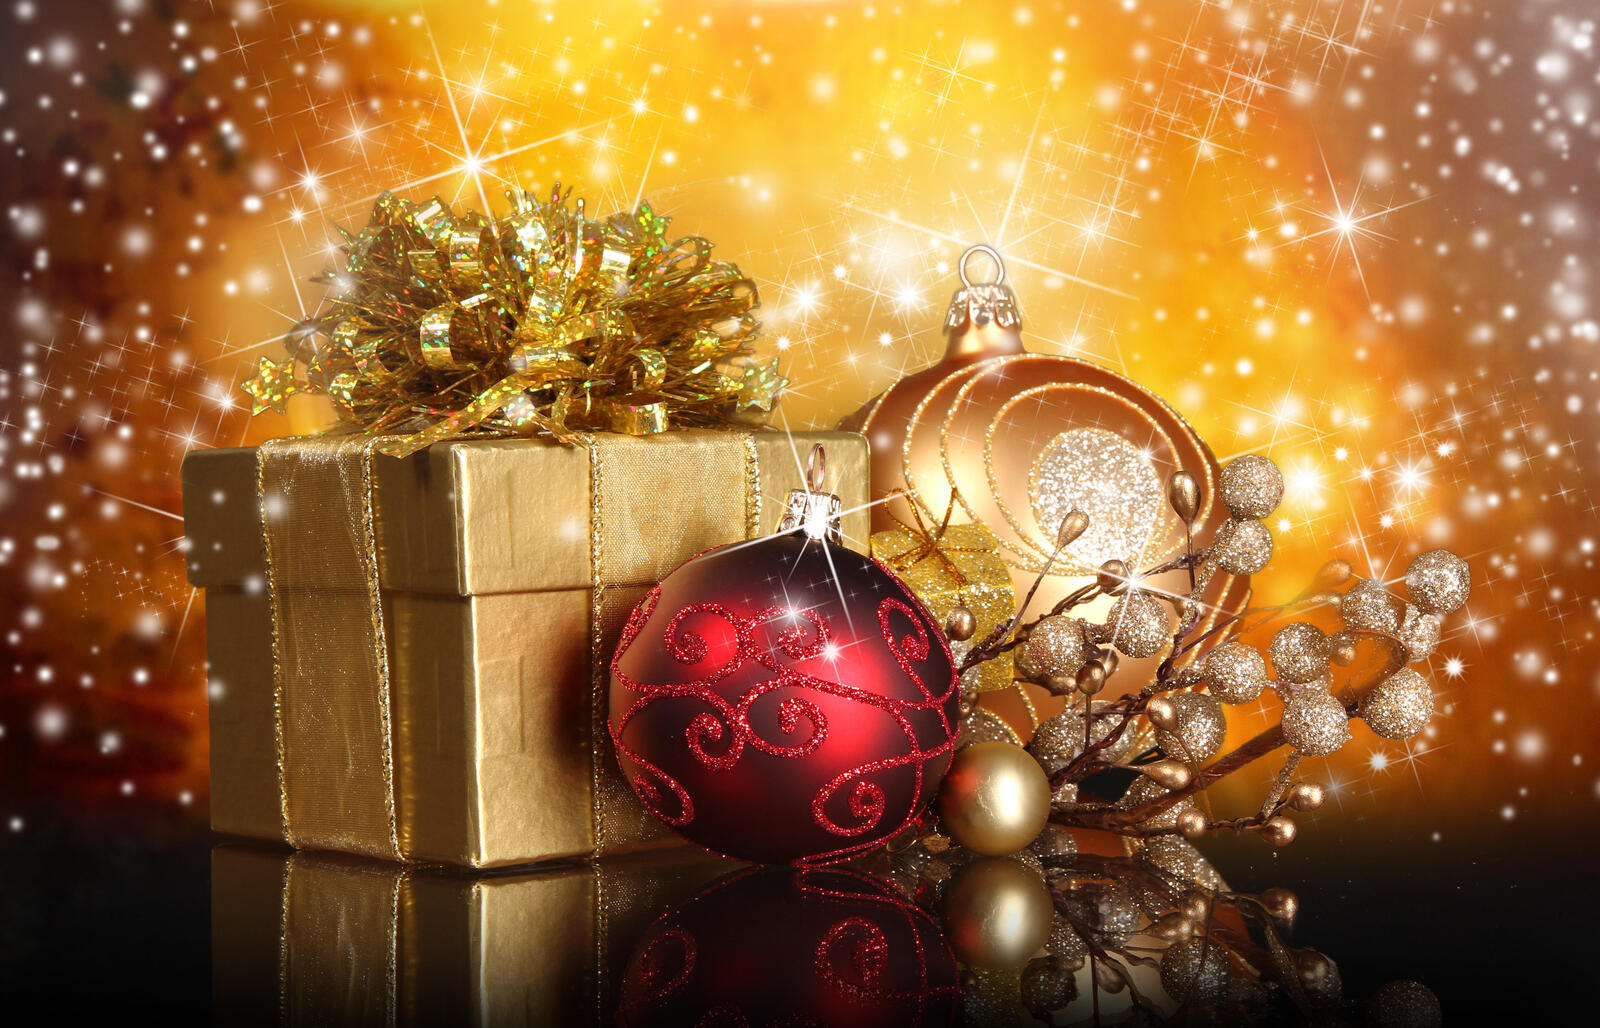 Wallpapers gifts Christmas decorations New Year s style on the desktop